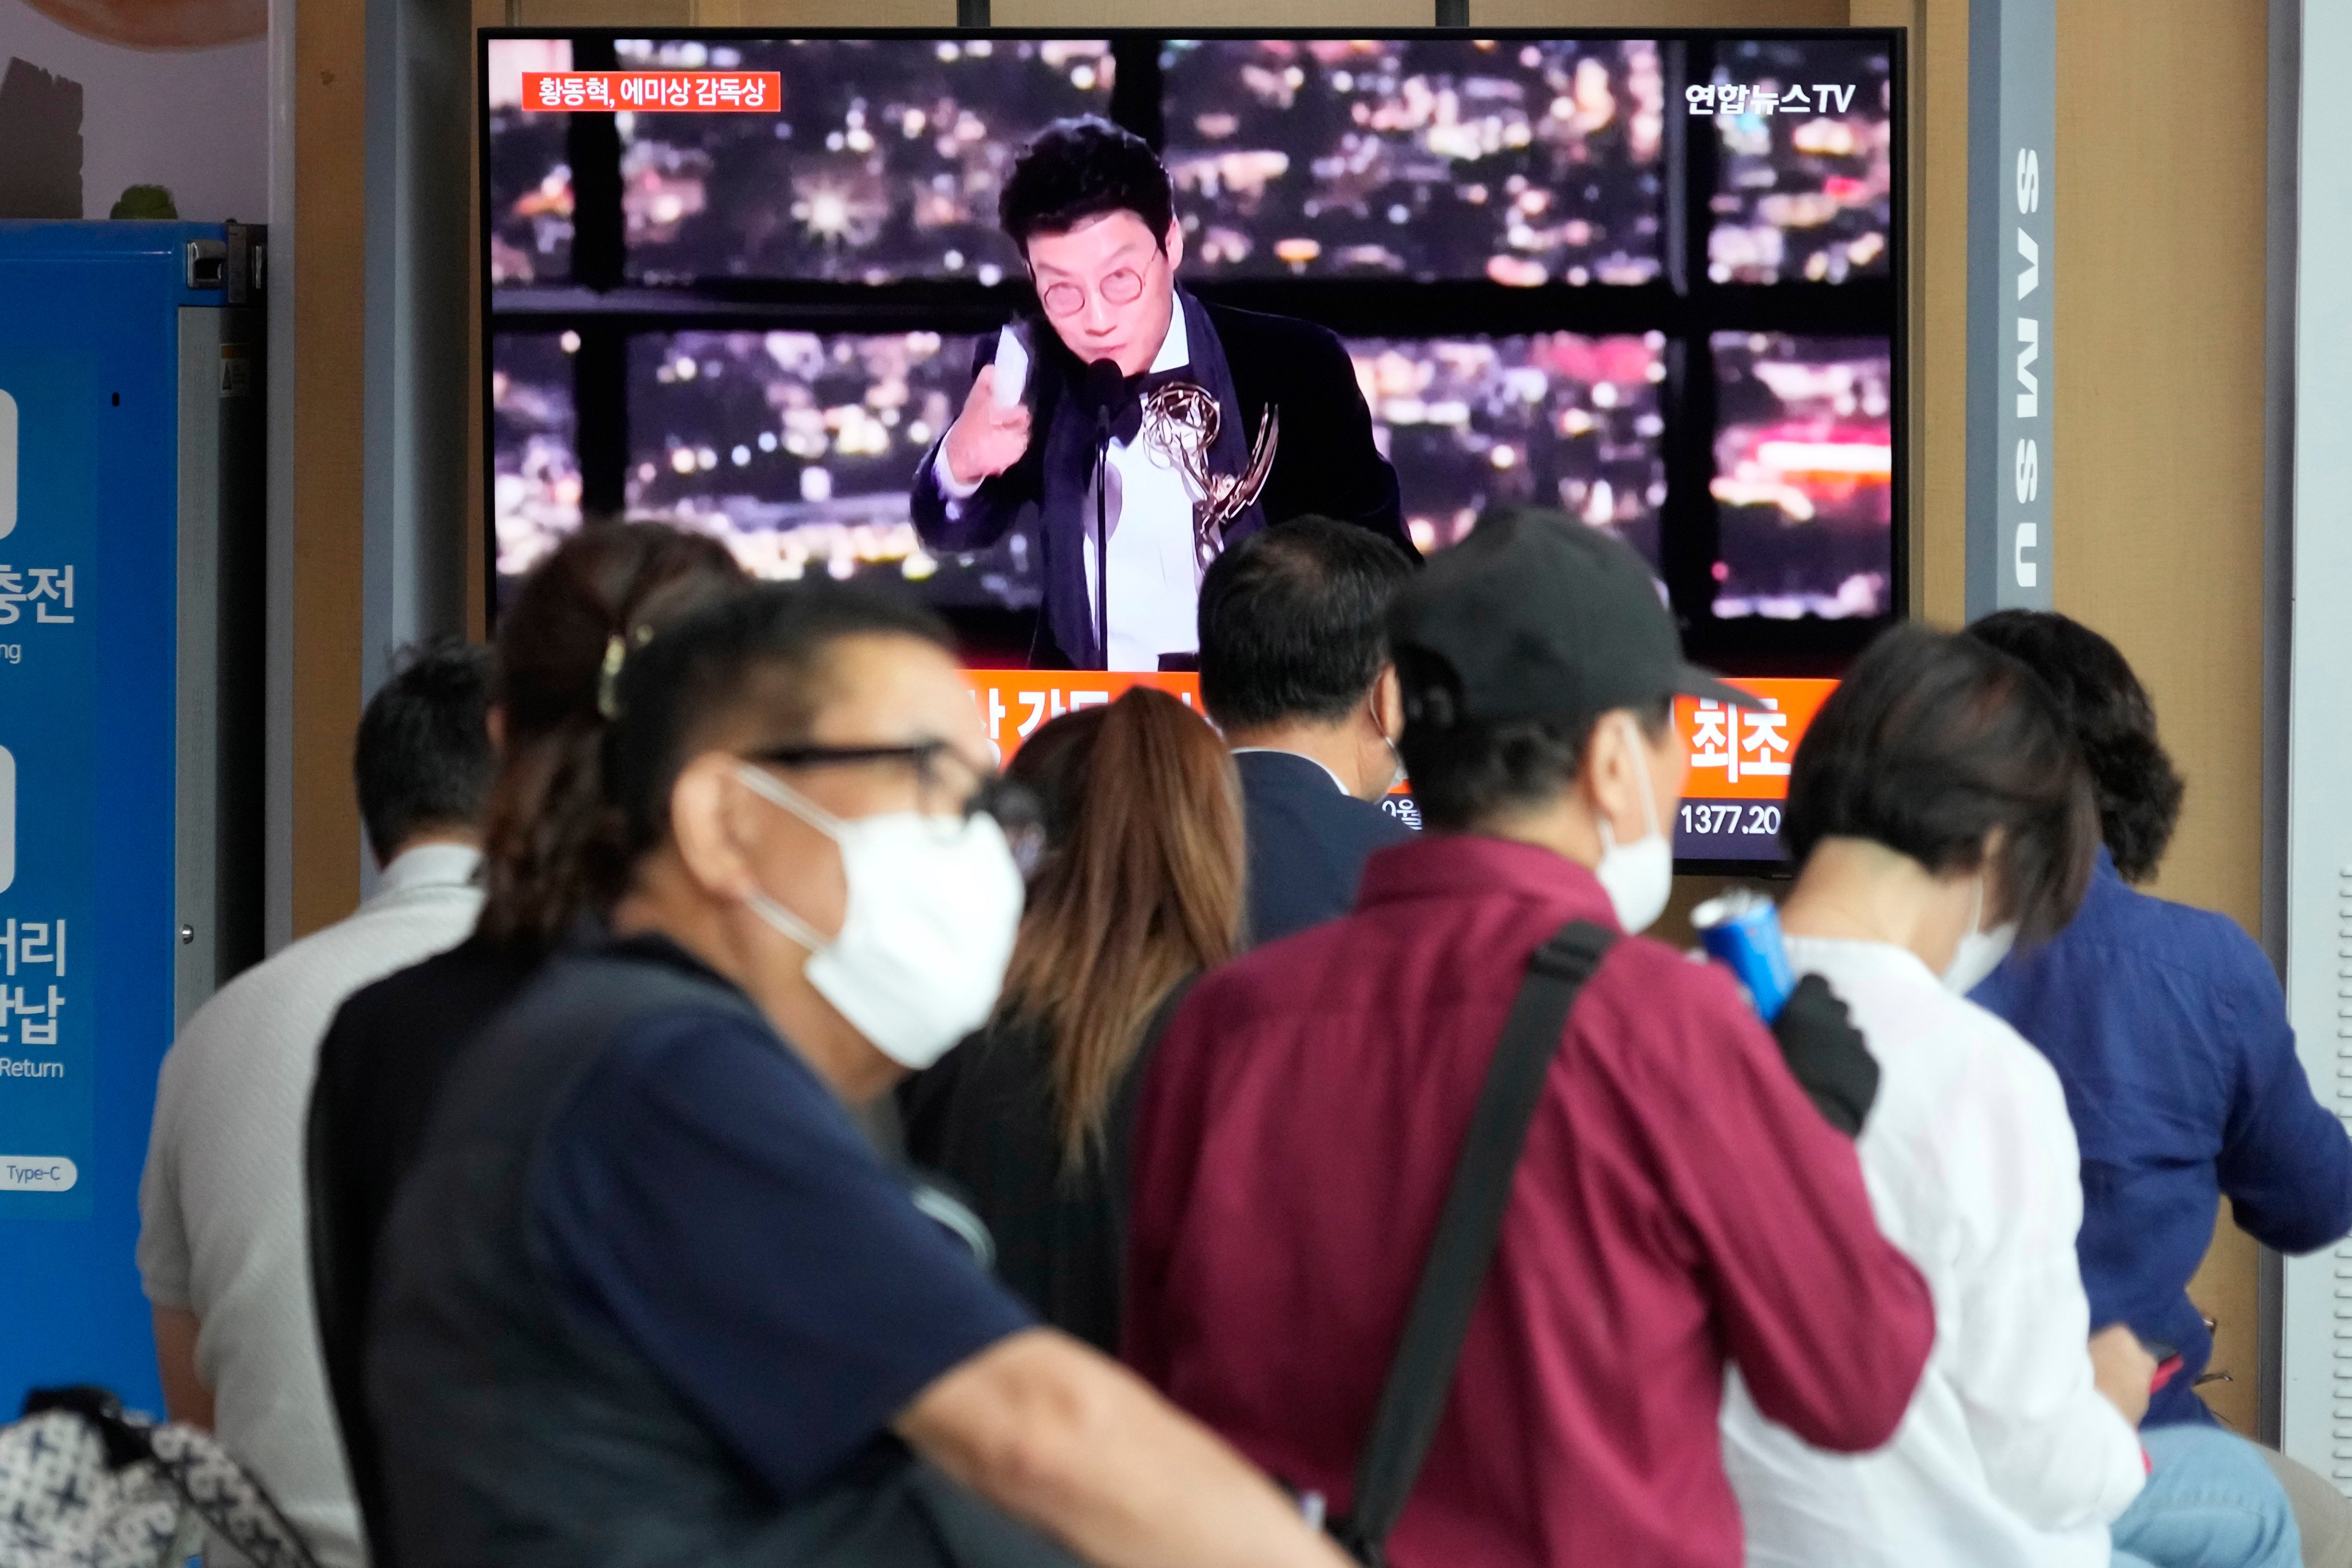 A TV screen shows Squid Game director Hwang Dong-hyuk accepting his Emmy award during a news programme at the Seoul Railway Station in Seoul on September 13. Photo: AP